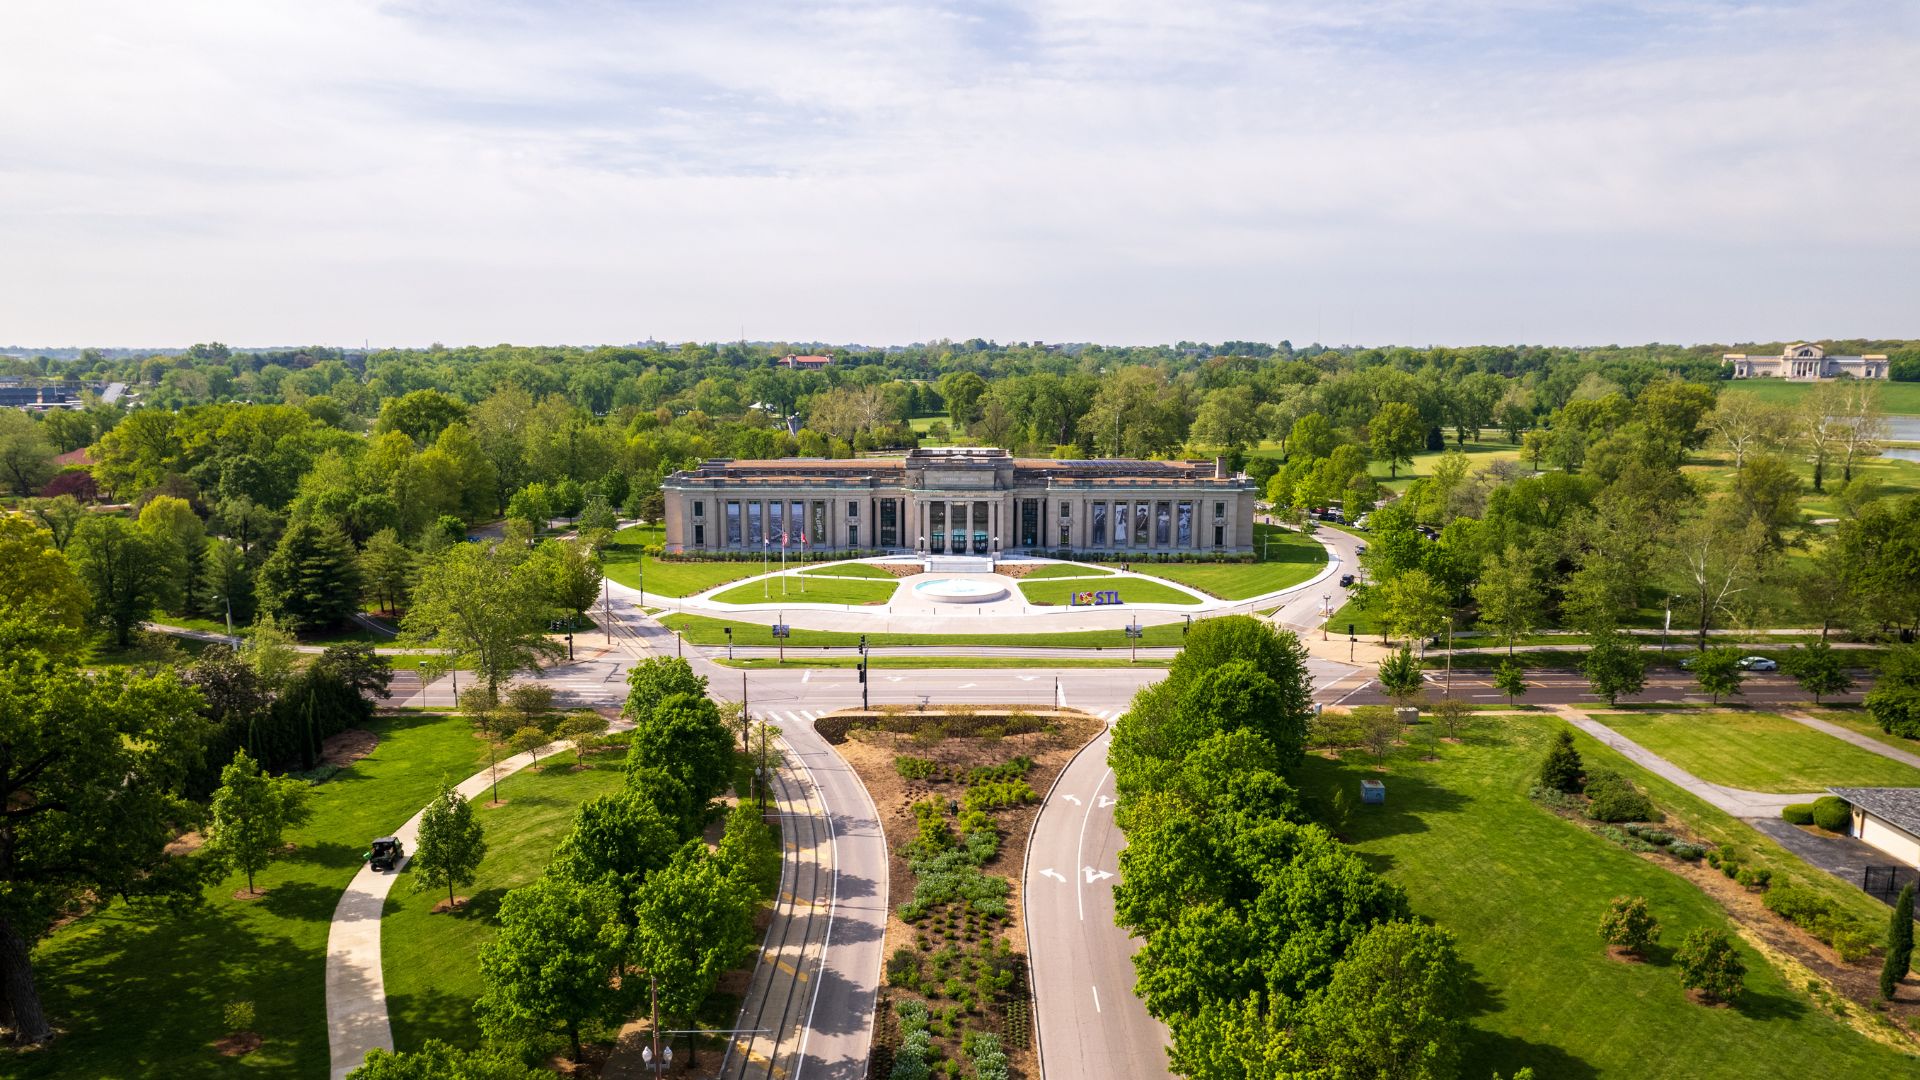 An aerial view shows the Missouri History Museum in Forest Park.